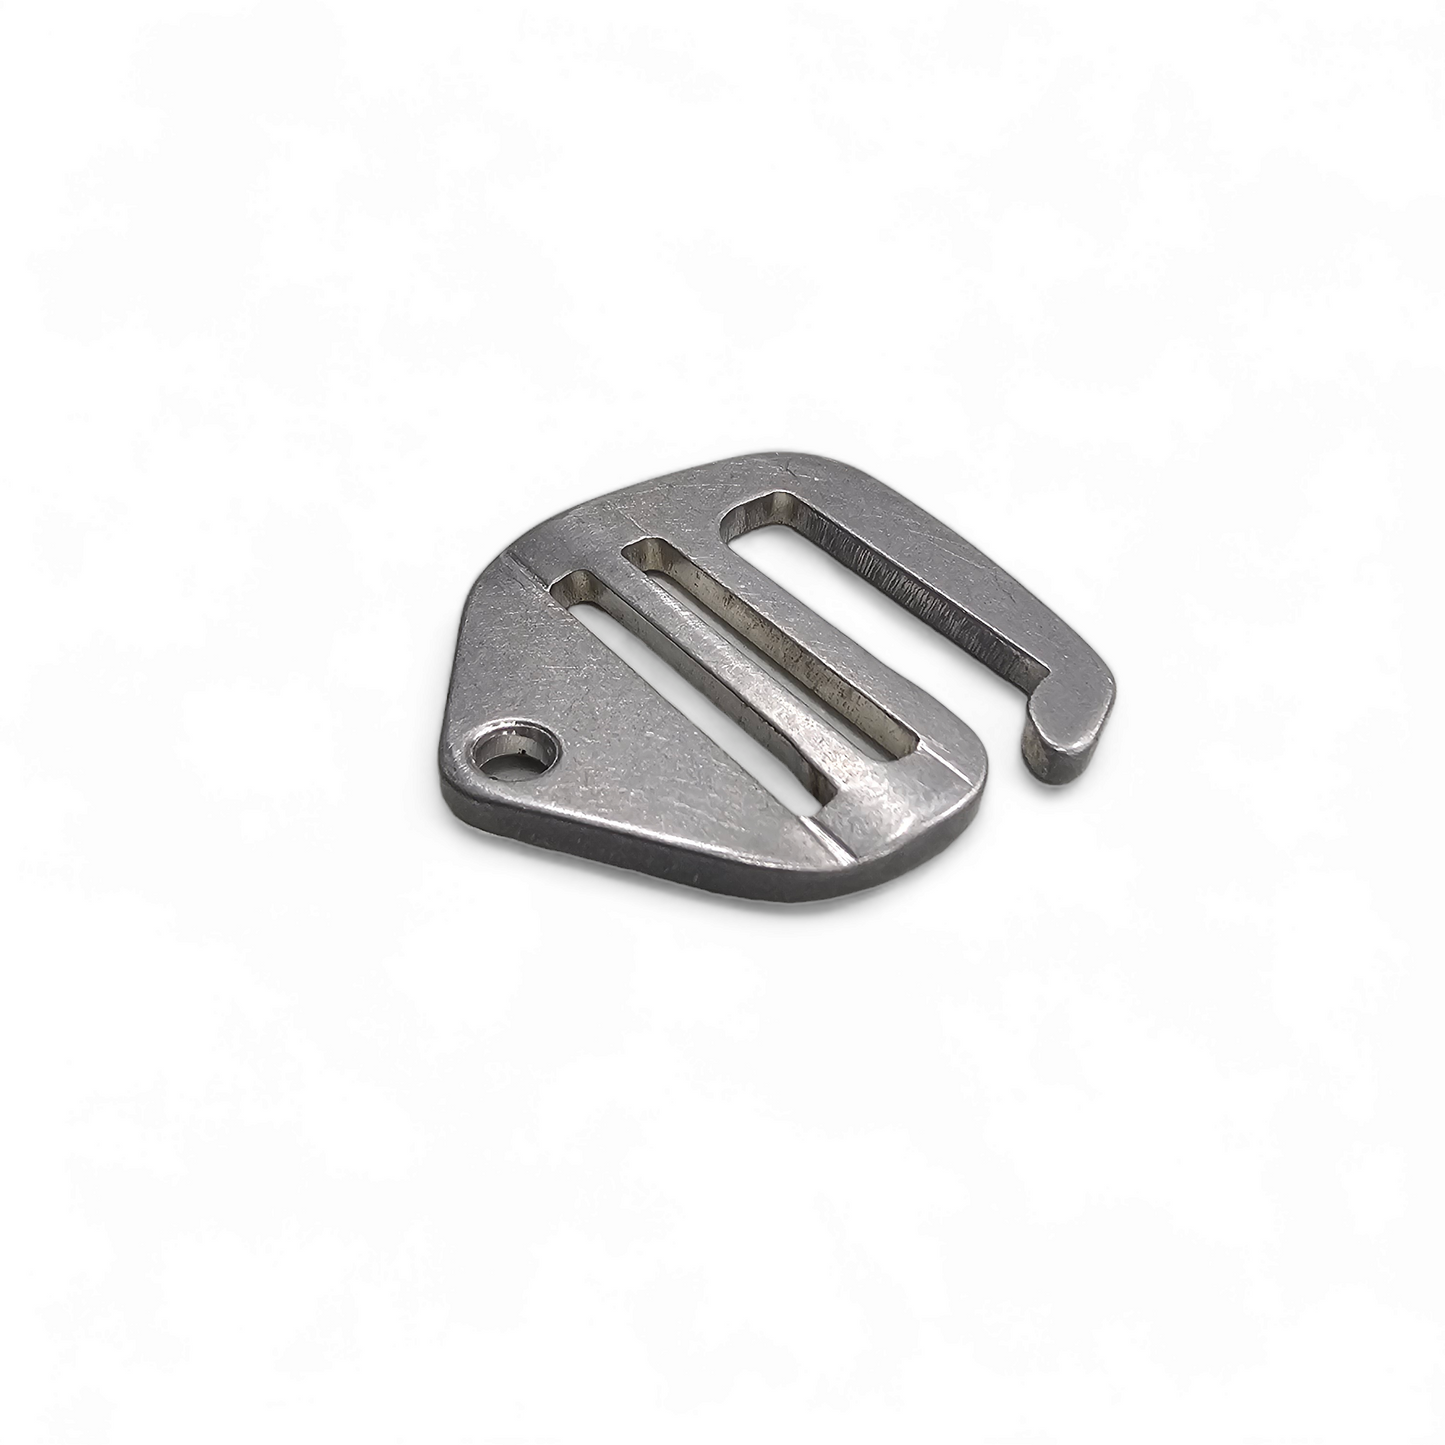 G-Hook Quick Release Buckle – Brautigam Expedition Works